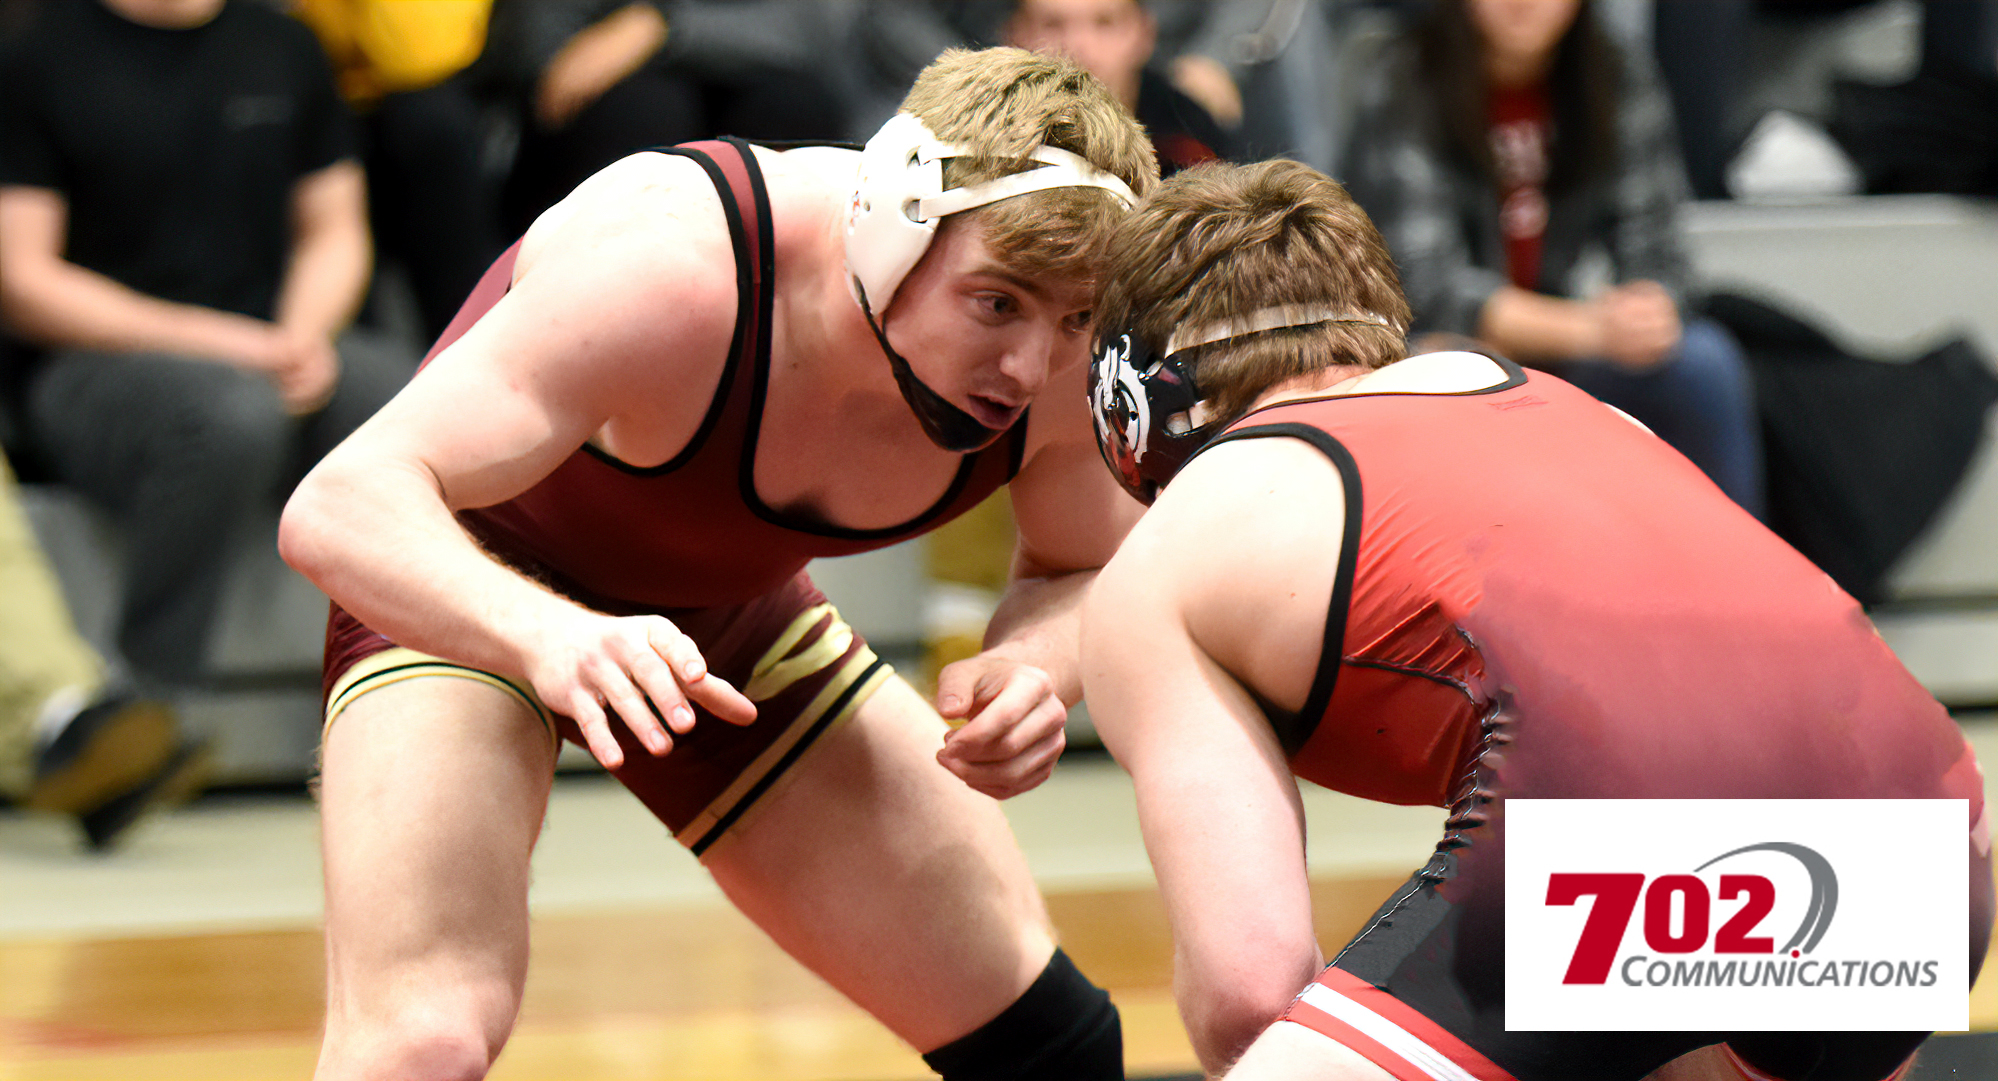 Senior Alex Skaare came through with a 2nd-period pin in his match at 165 which started the Cobbers' cruise in their exhibition at St. John's.